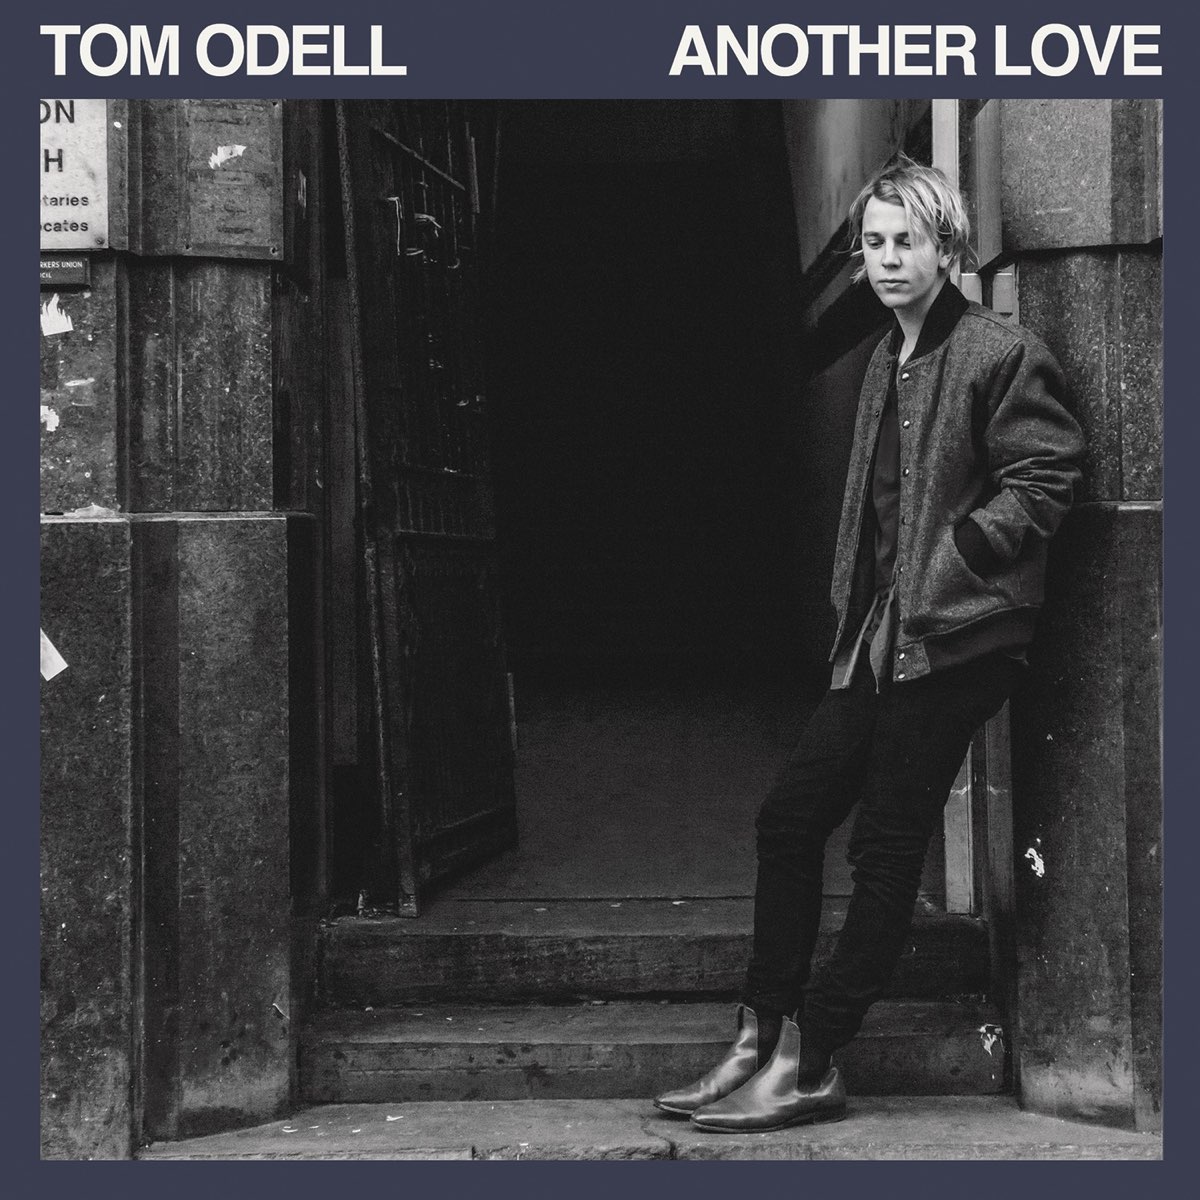 Another Love - Single by Tom Odell on Apple Music